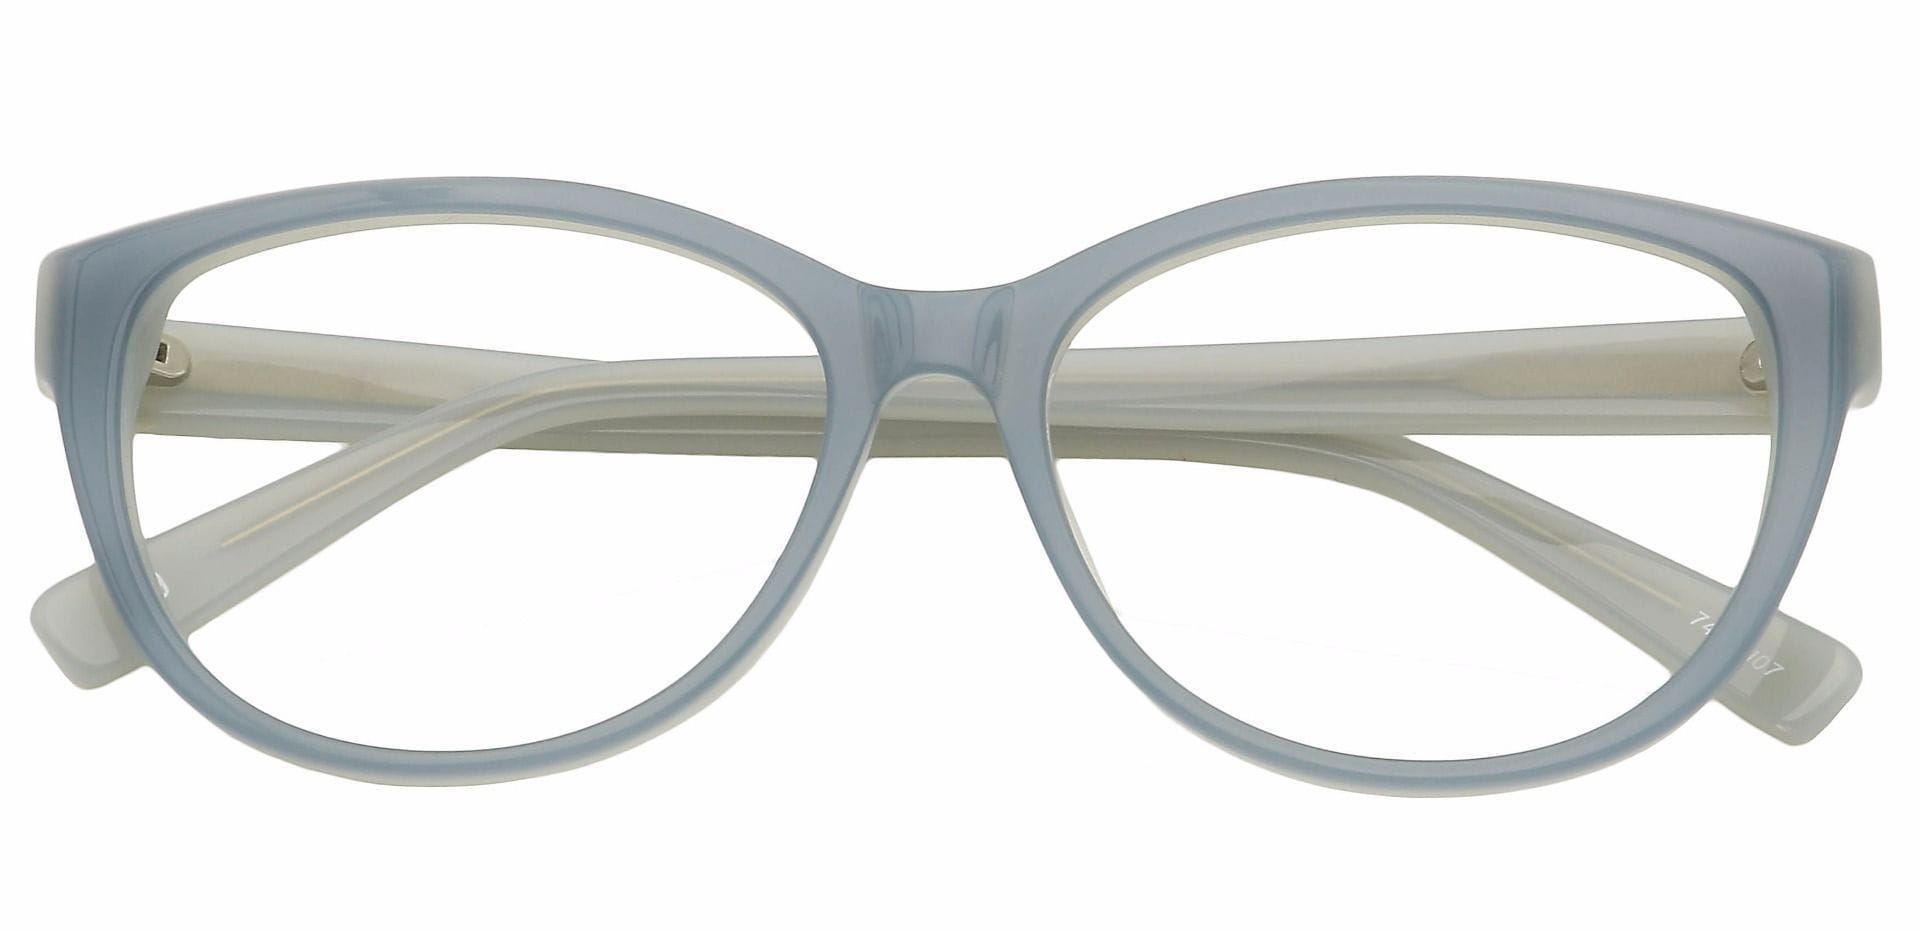 A pair of glasses with blue-toned Sera Oversized frames.